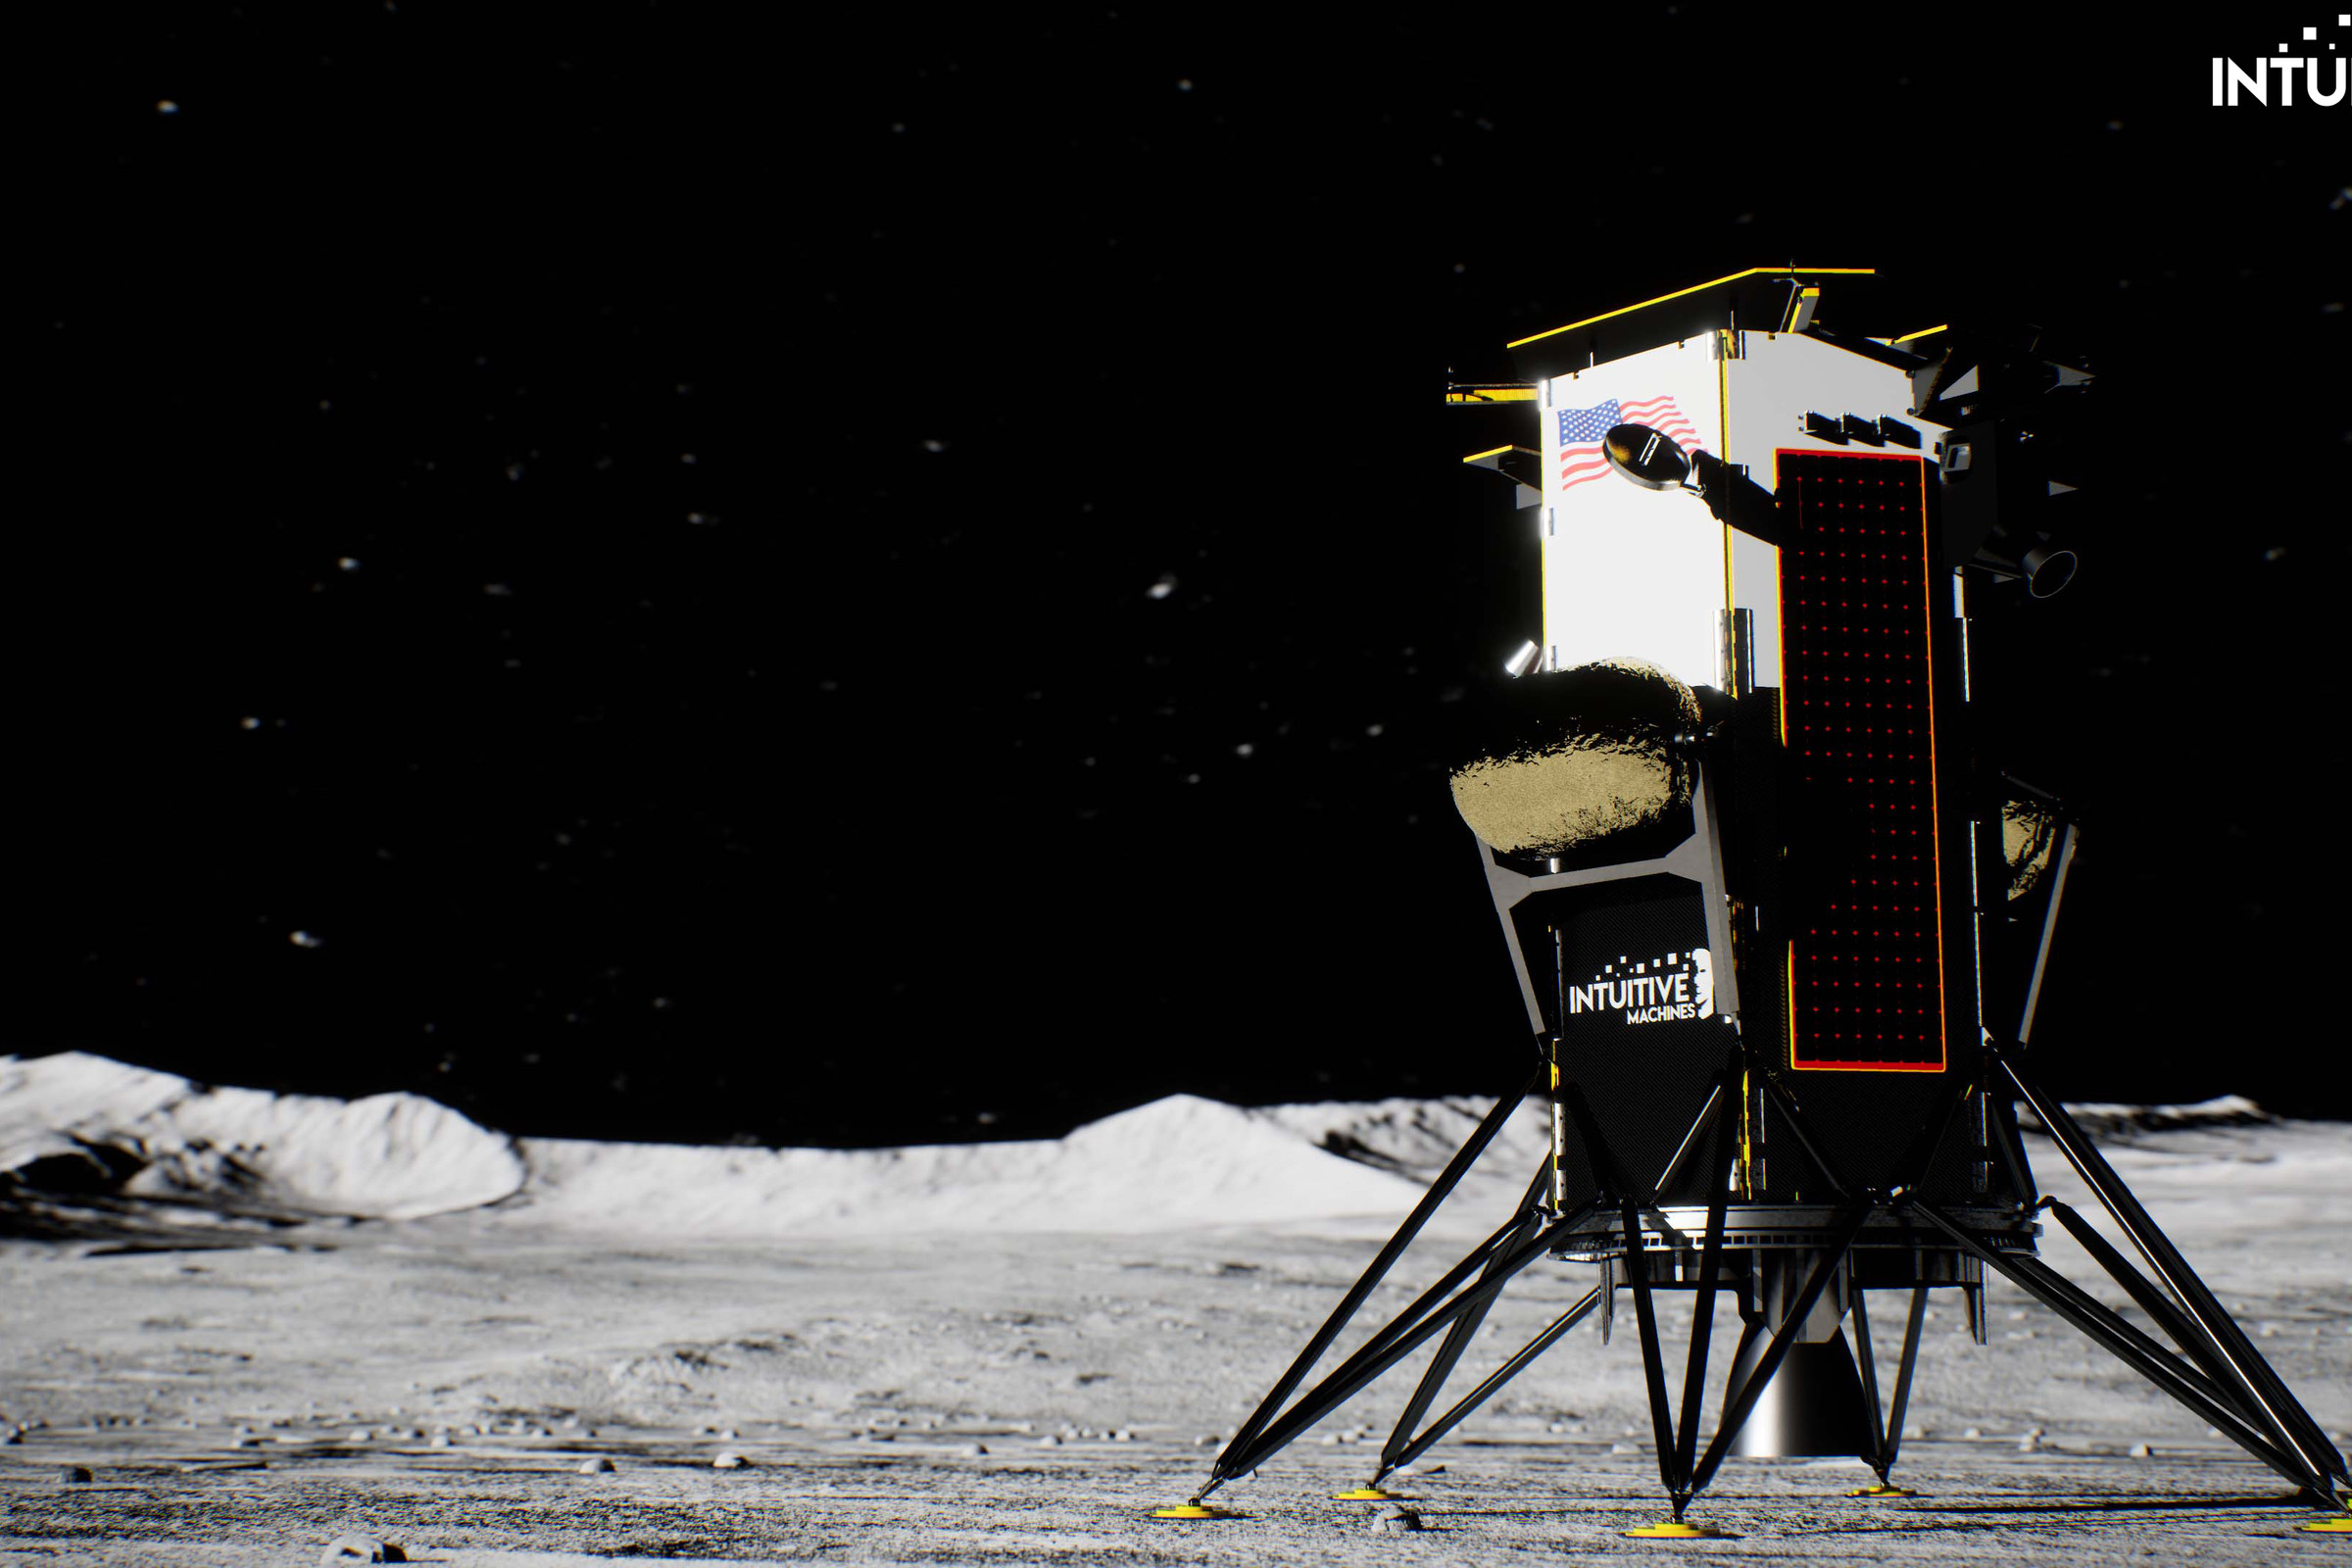 An artistic rendering of Intuitive Machines’ lander on the lunar surface